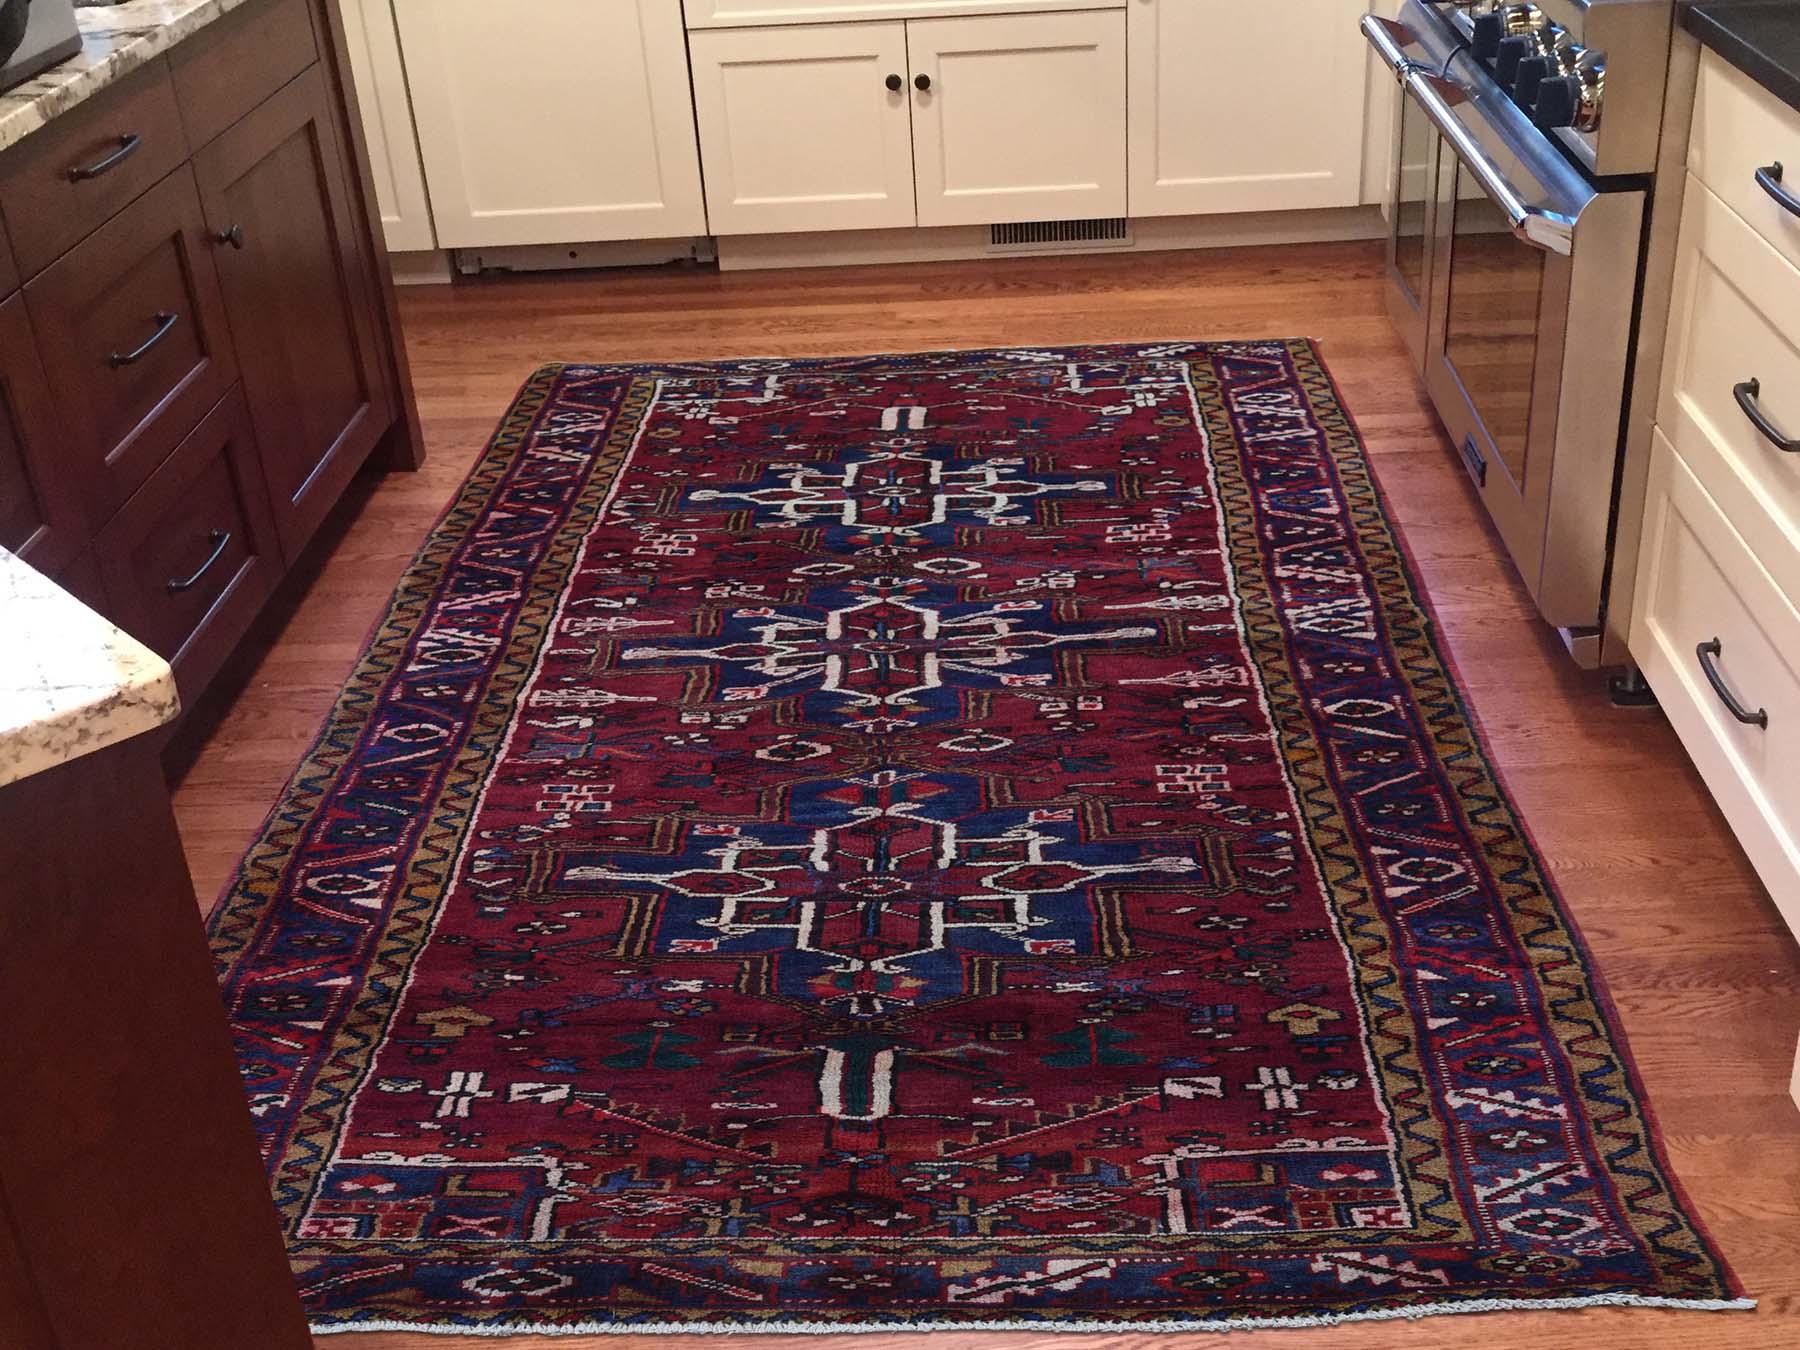 This is a truly genuine one-of-a-kind semi antique Persian Heriz pure wool runner hand-knotted oriental rug. It has been knotted for months and months in the centuries-old Persian weaving craftsmanship techniques by expert artisans. 

Primary